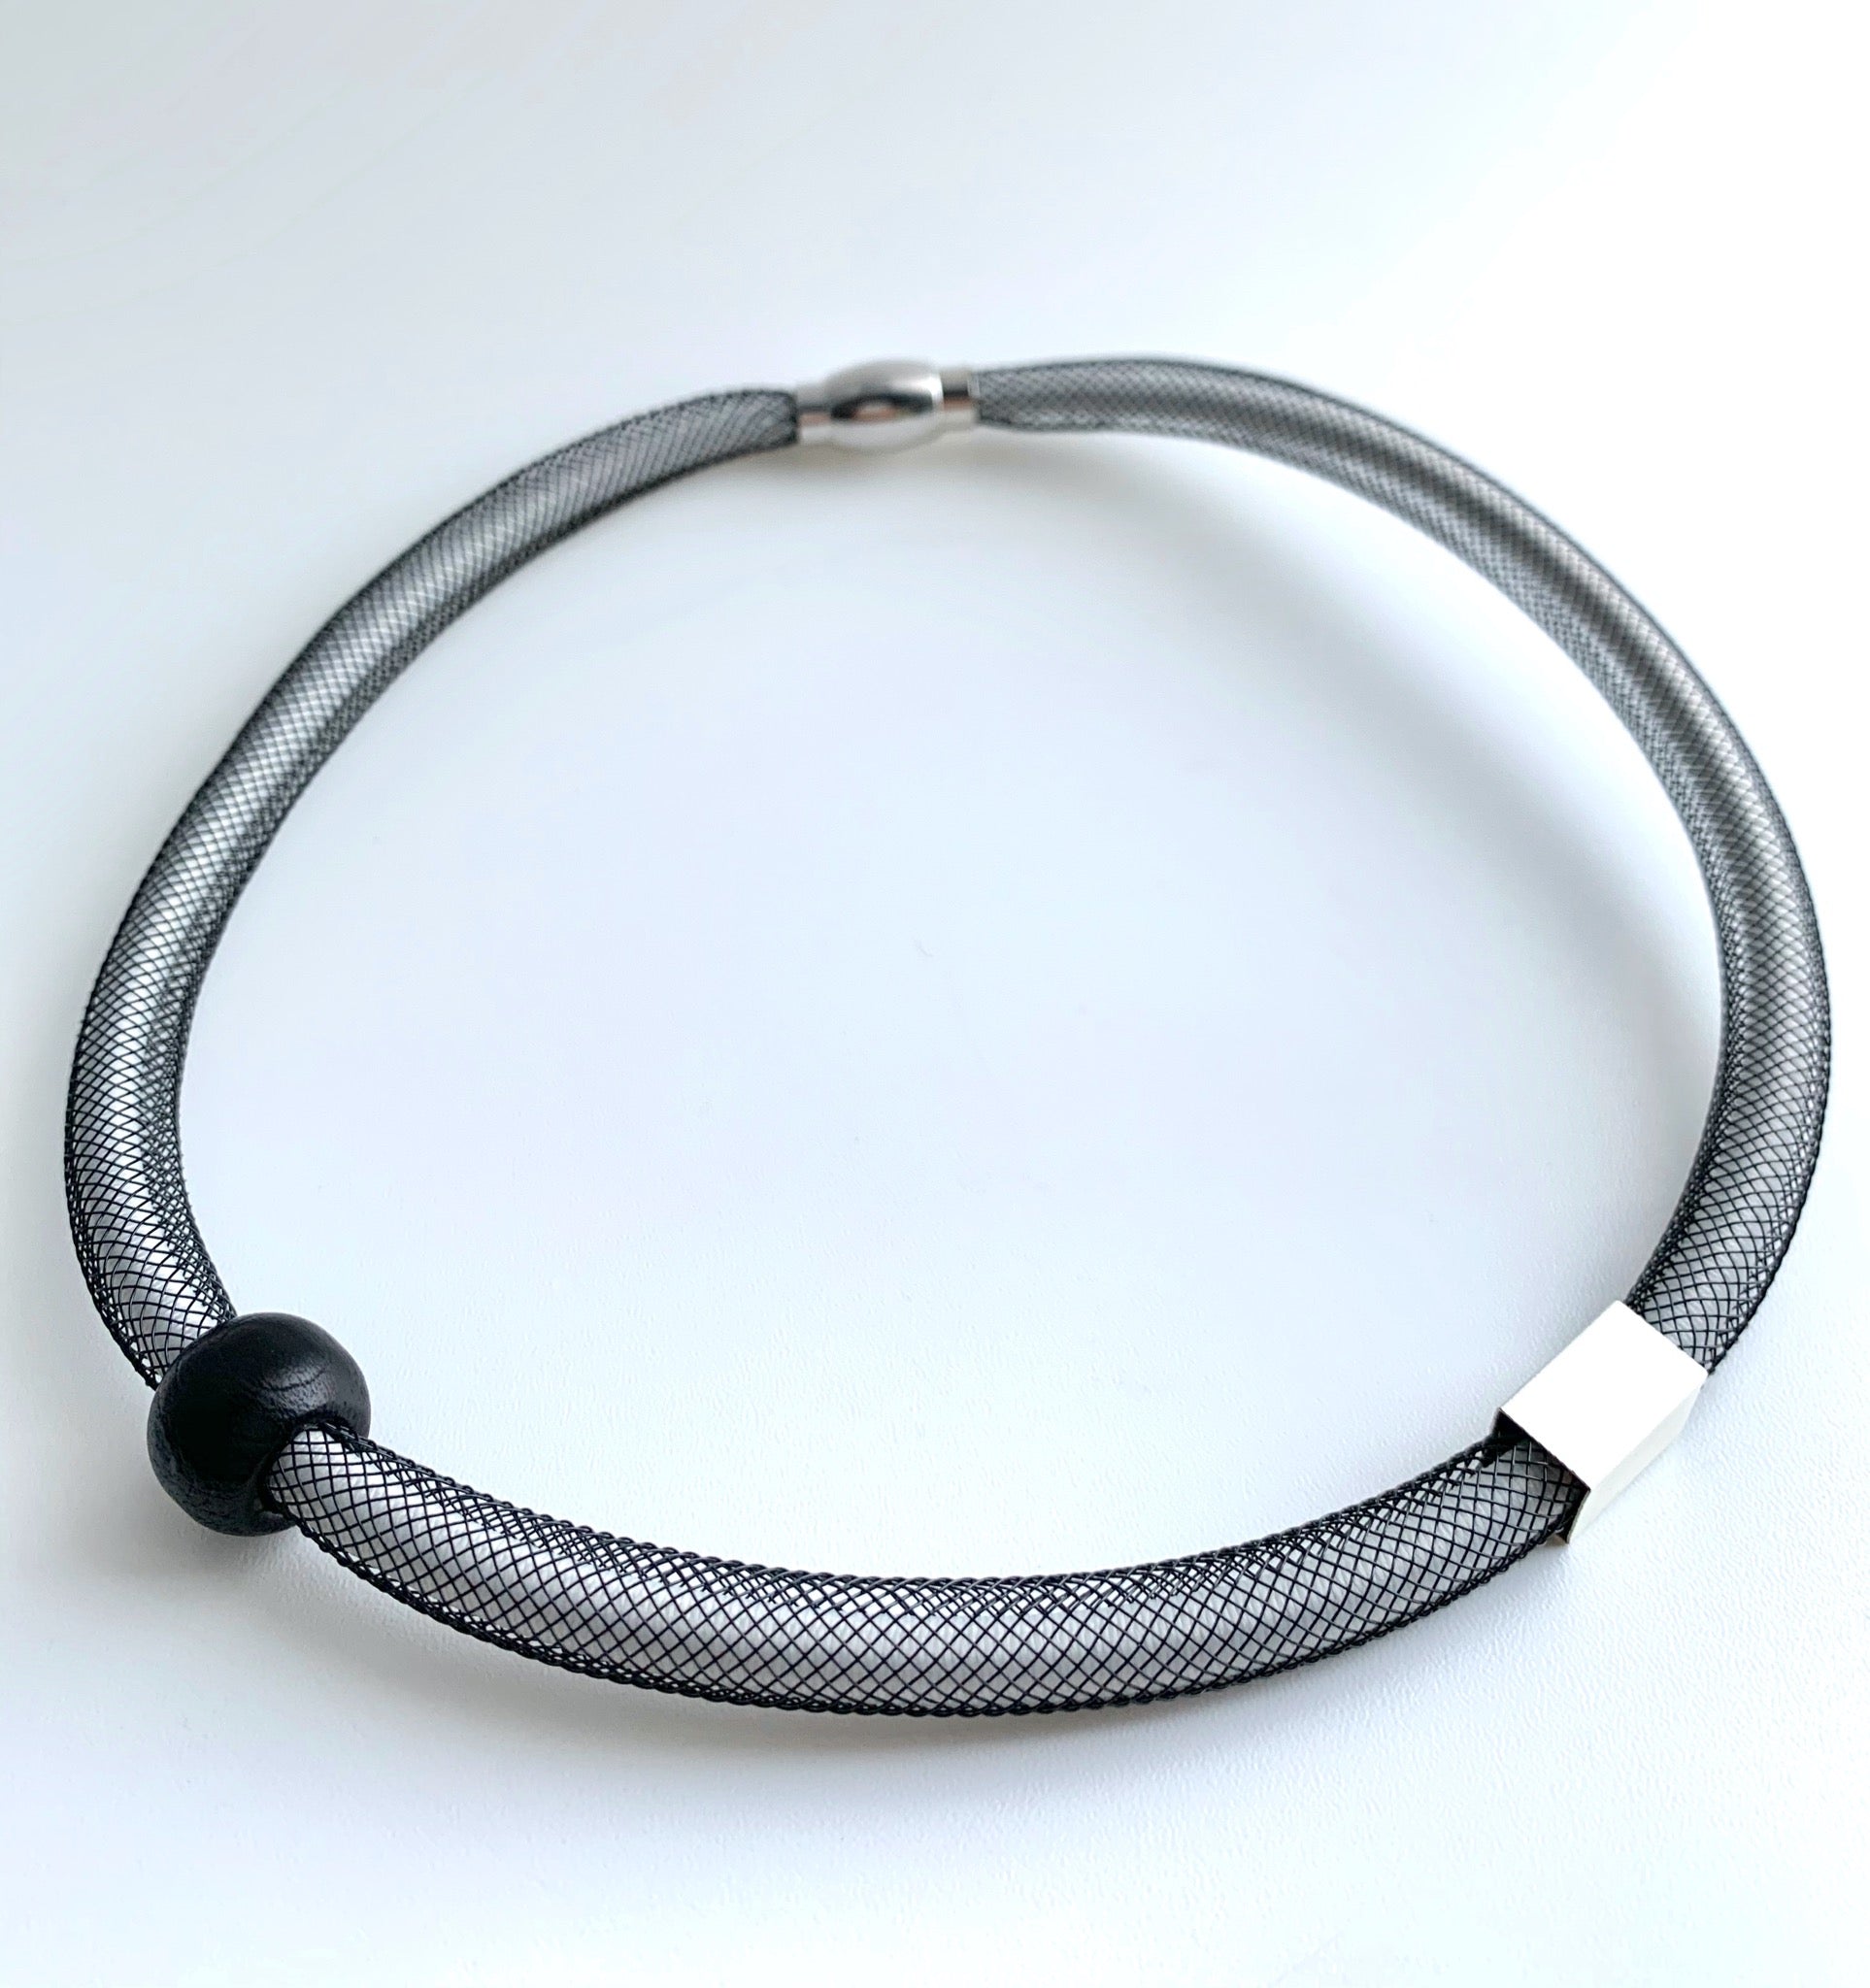 This Short Tubular is made with white shock cord and black netted tubing. it is 43cm 